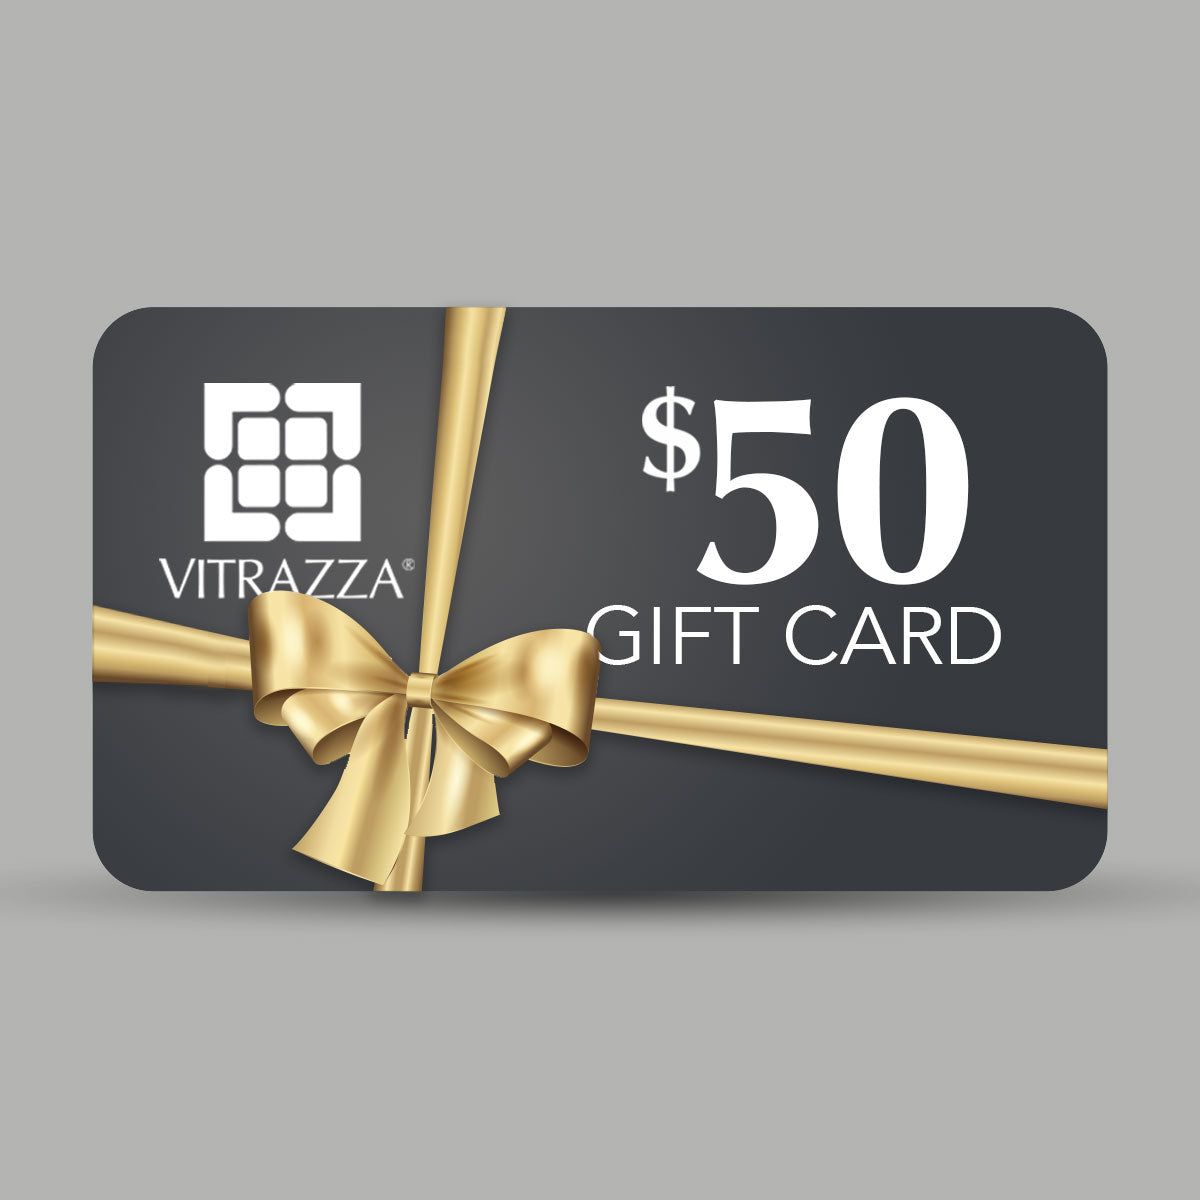 variant_title: Gift Card | Size: $50.00 USD :: alt_text: